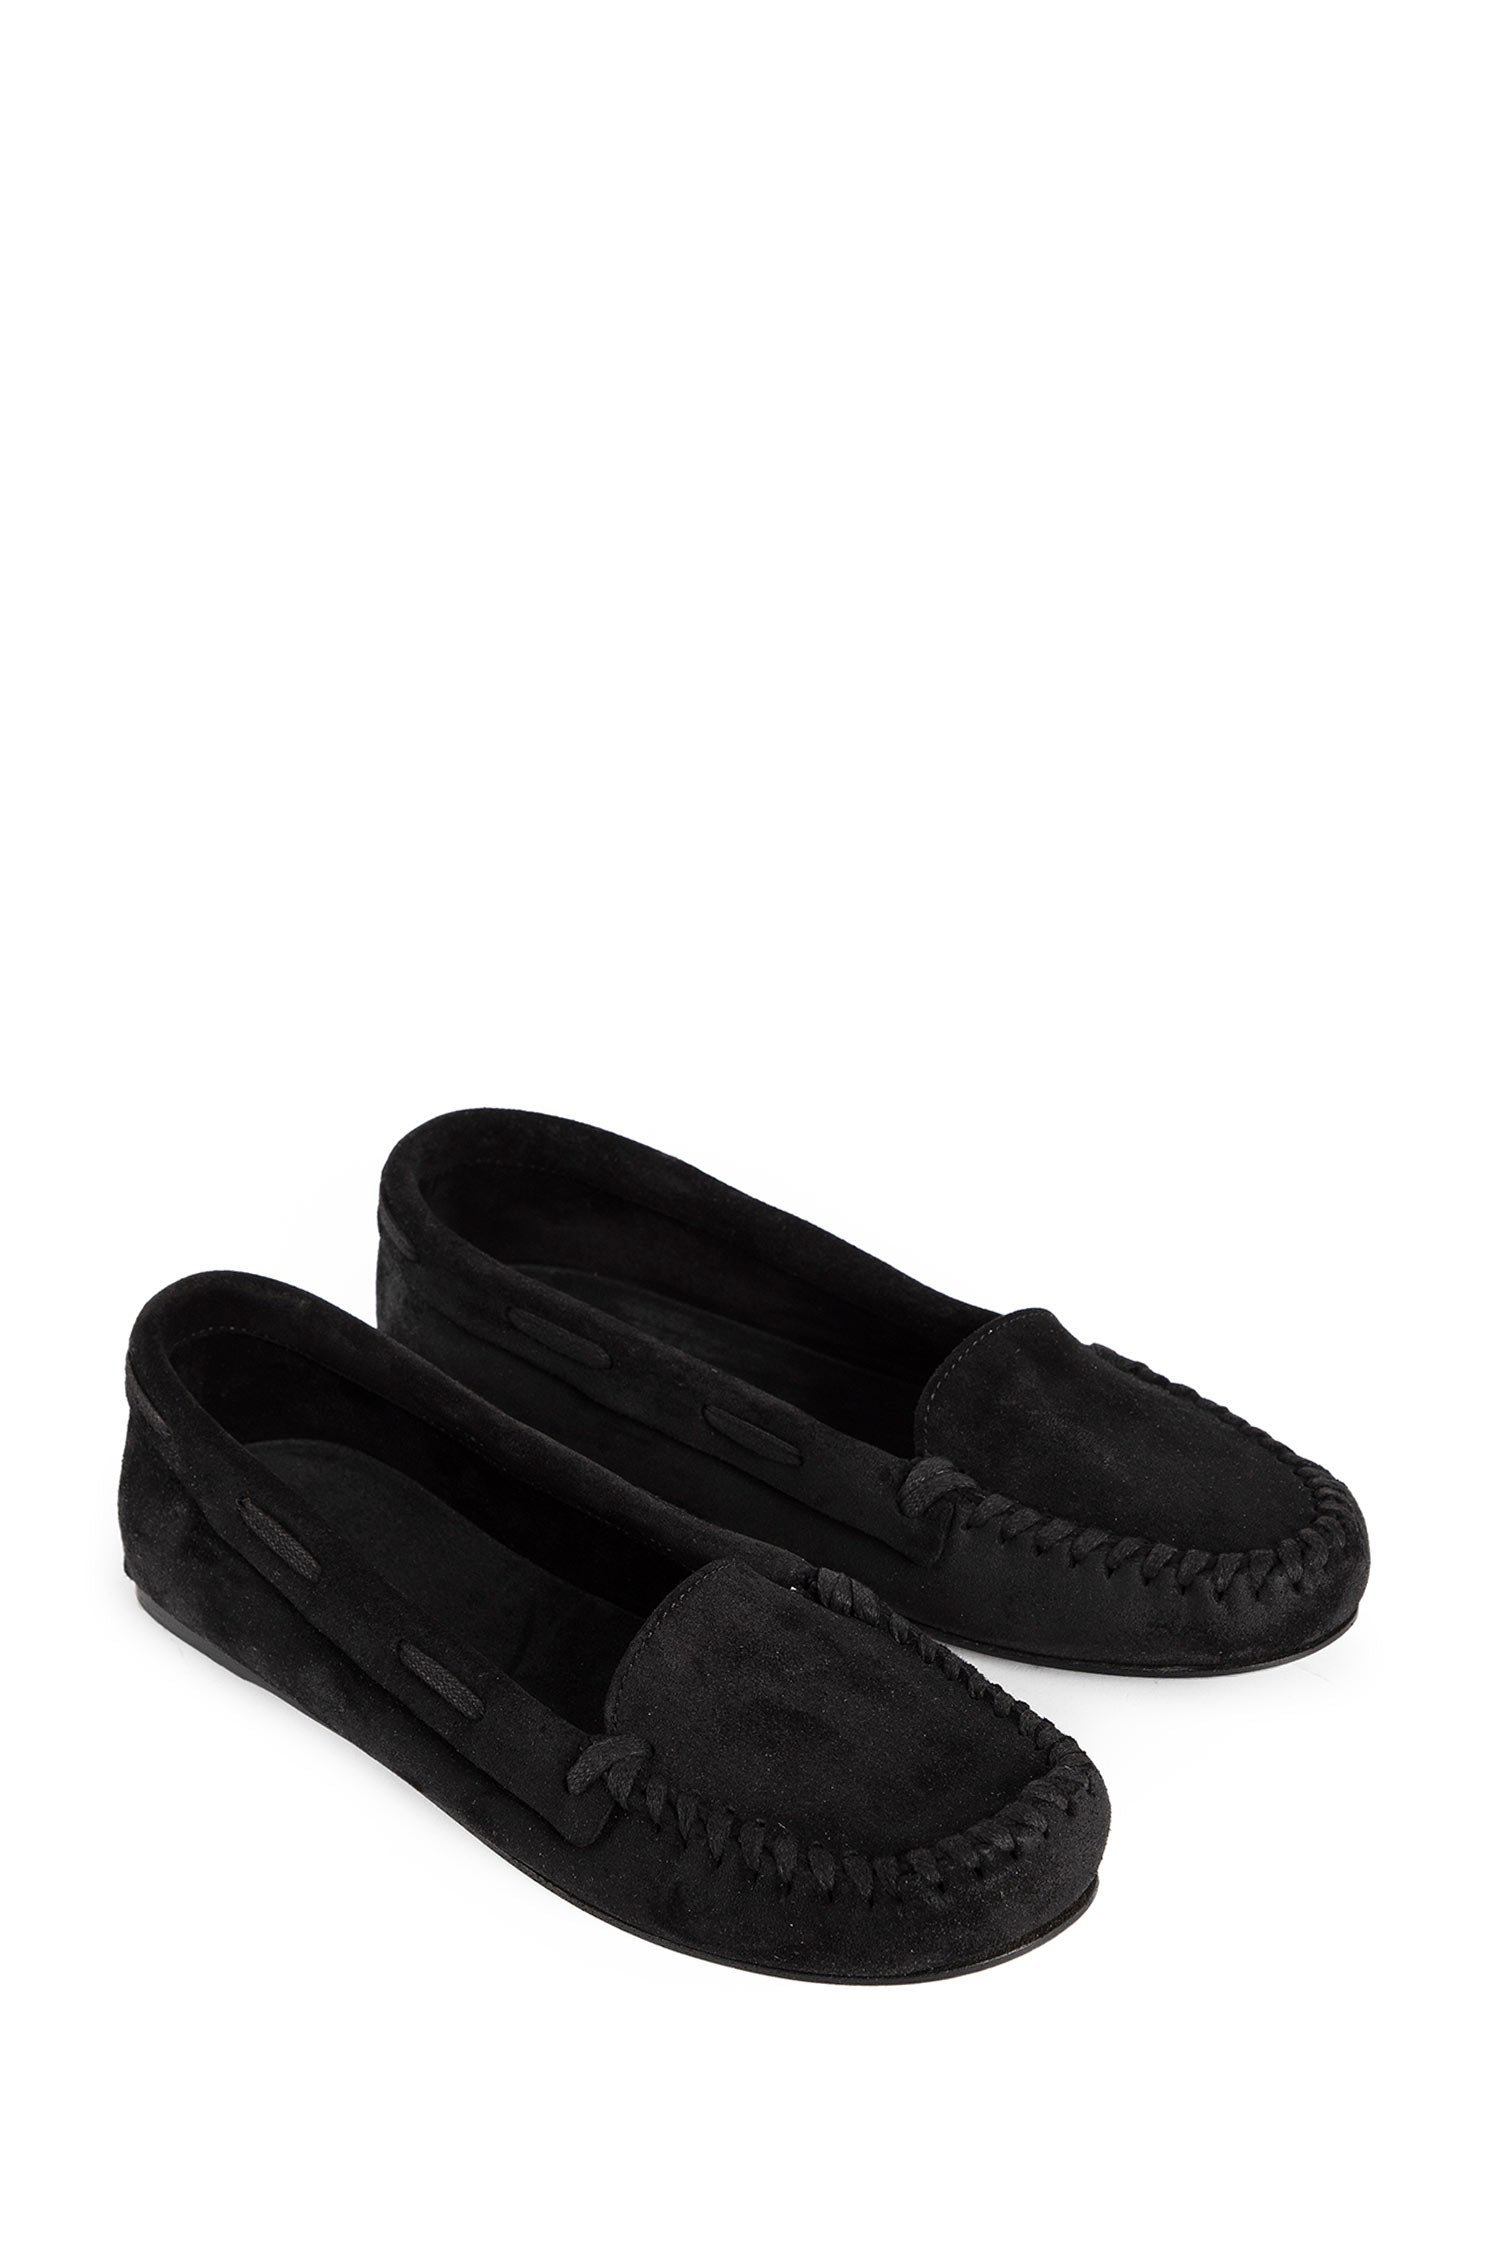 THE ROW WOMAN BLACK LOAFERS & FLATS